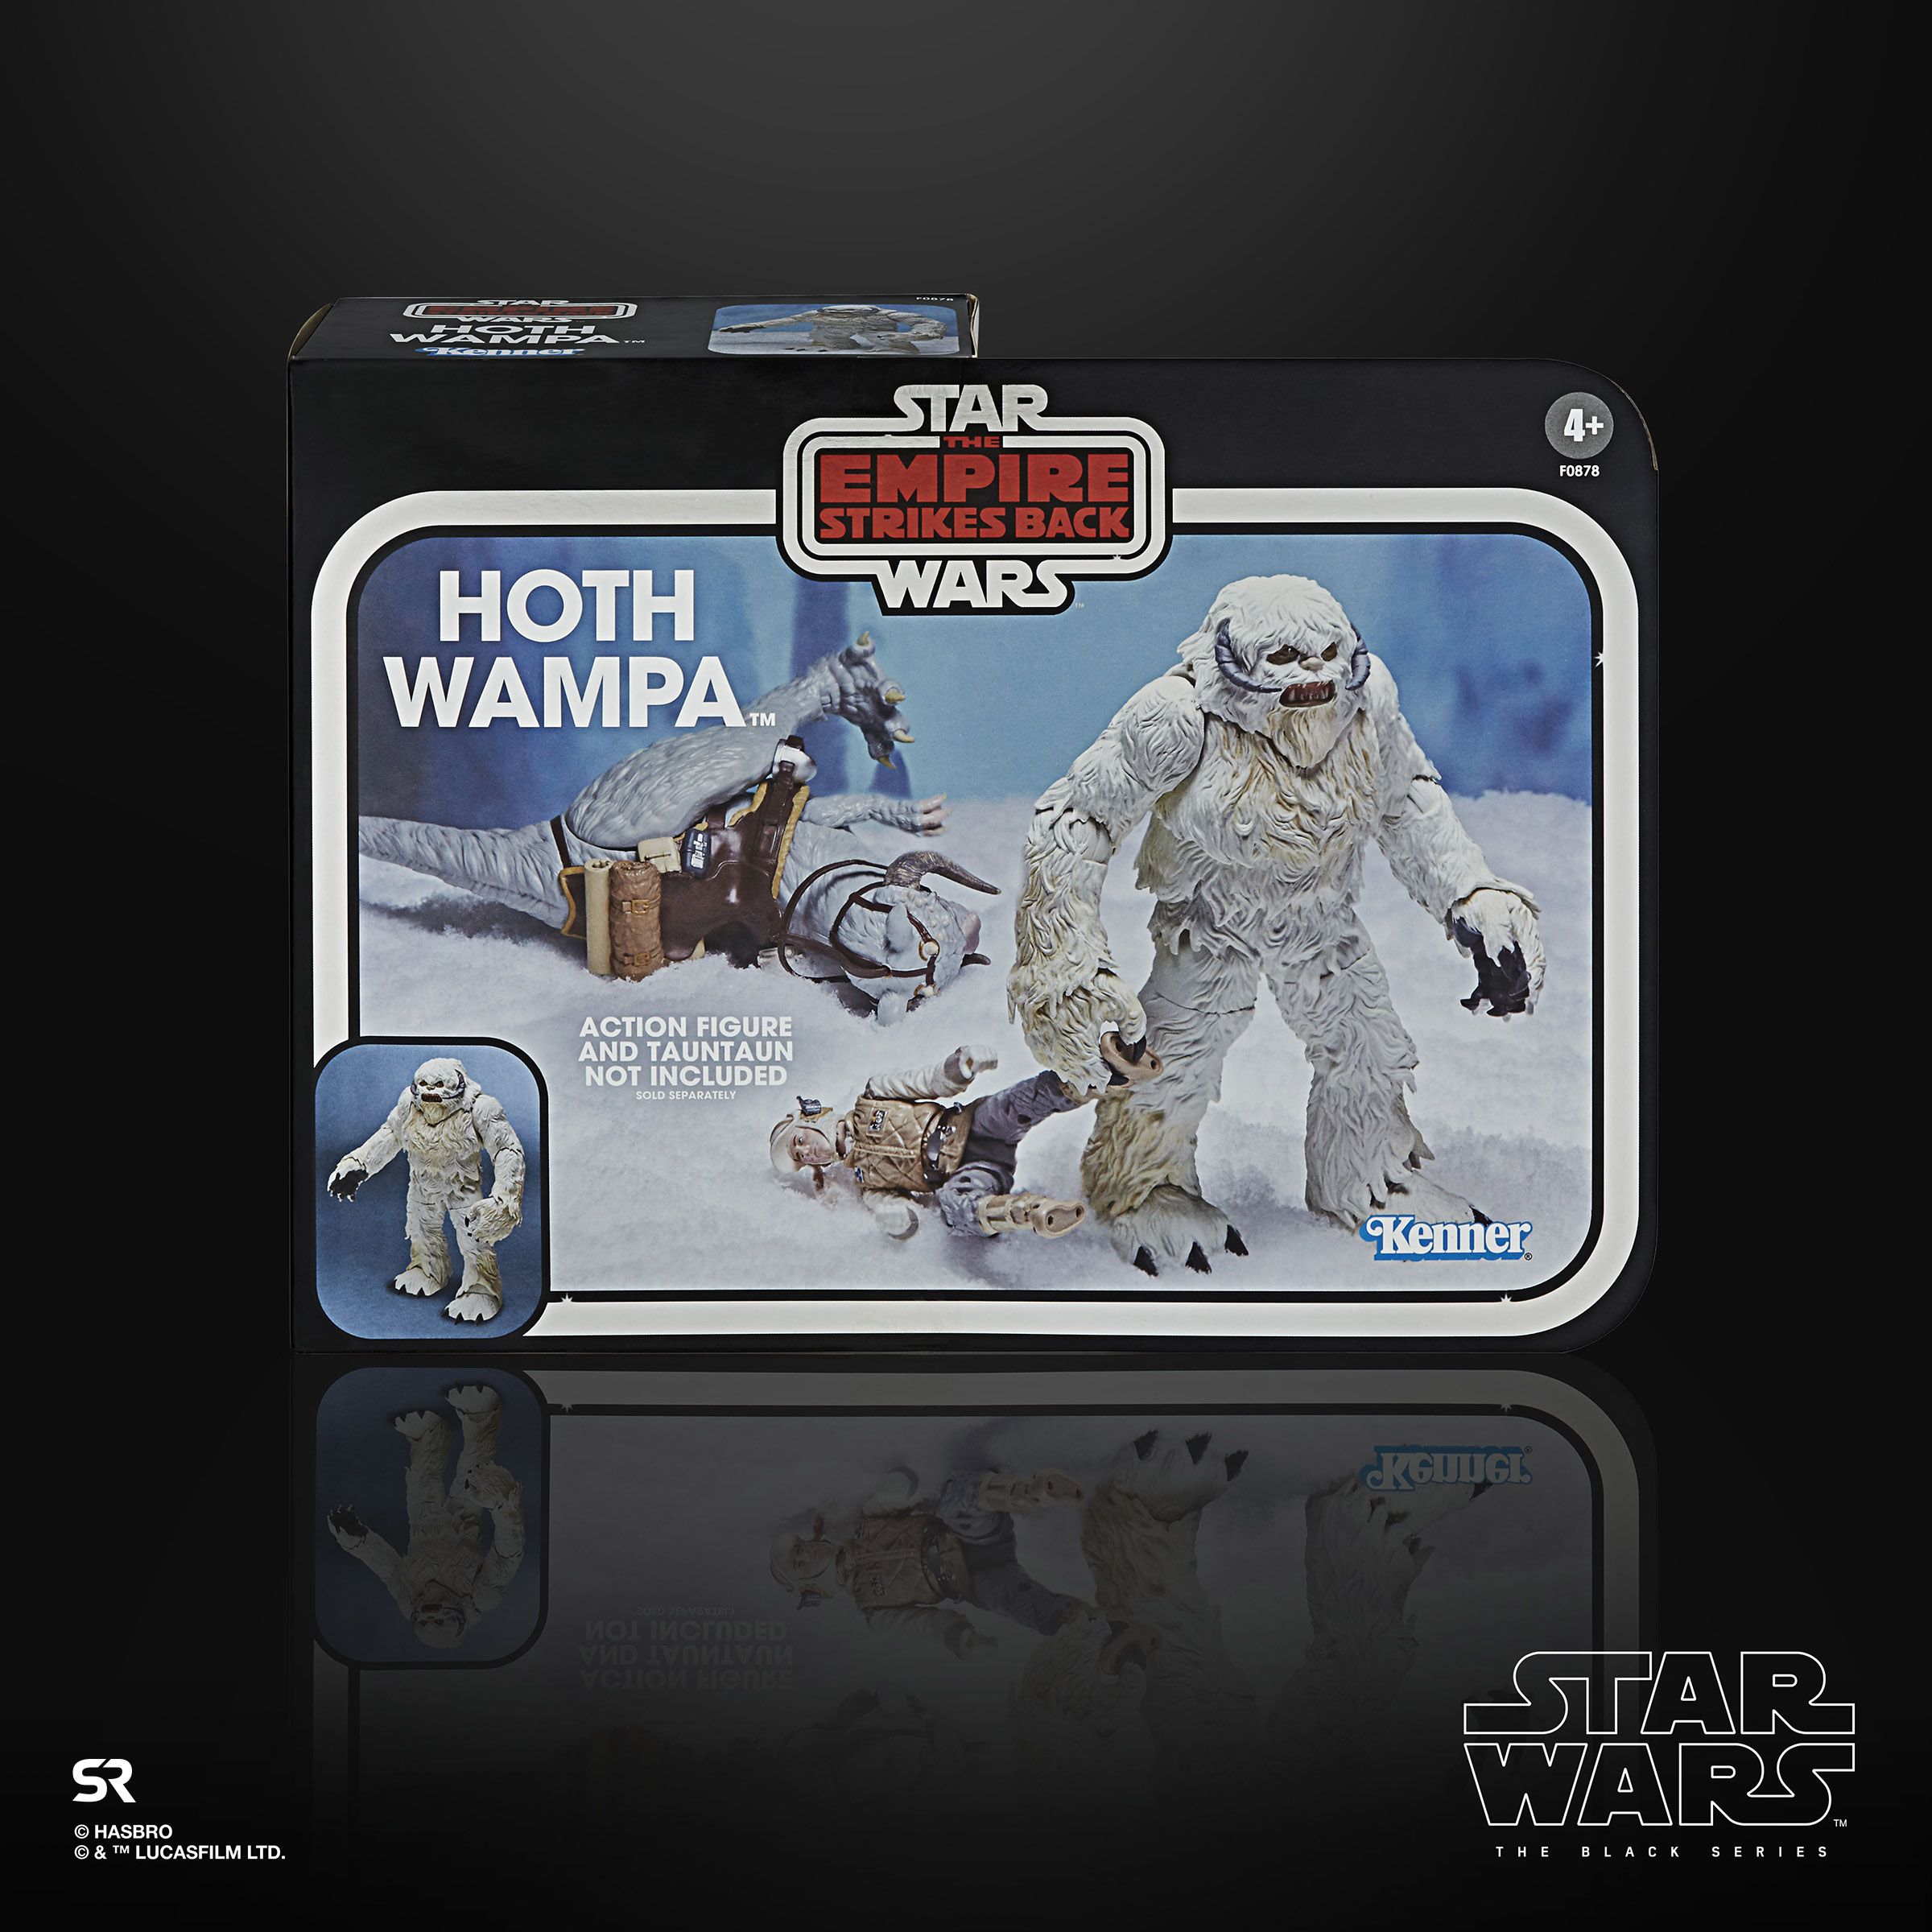 Star Wars The Black Series 6-Inch-Scale Hoth Wampa Figure Box Packaging Front